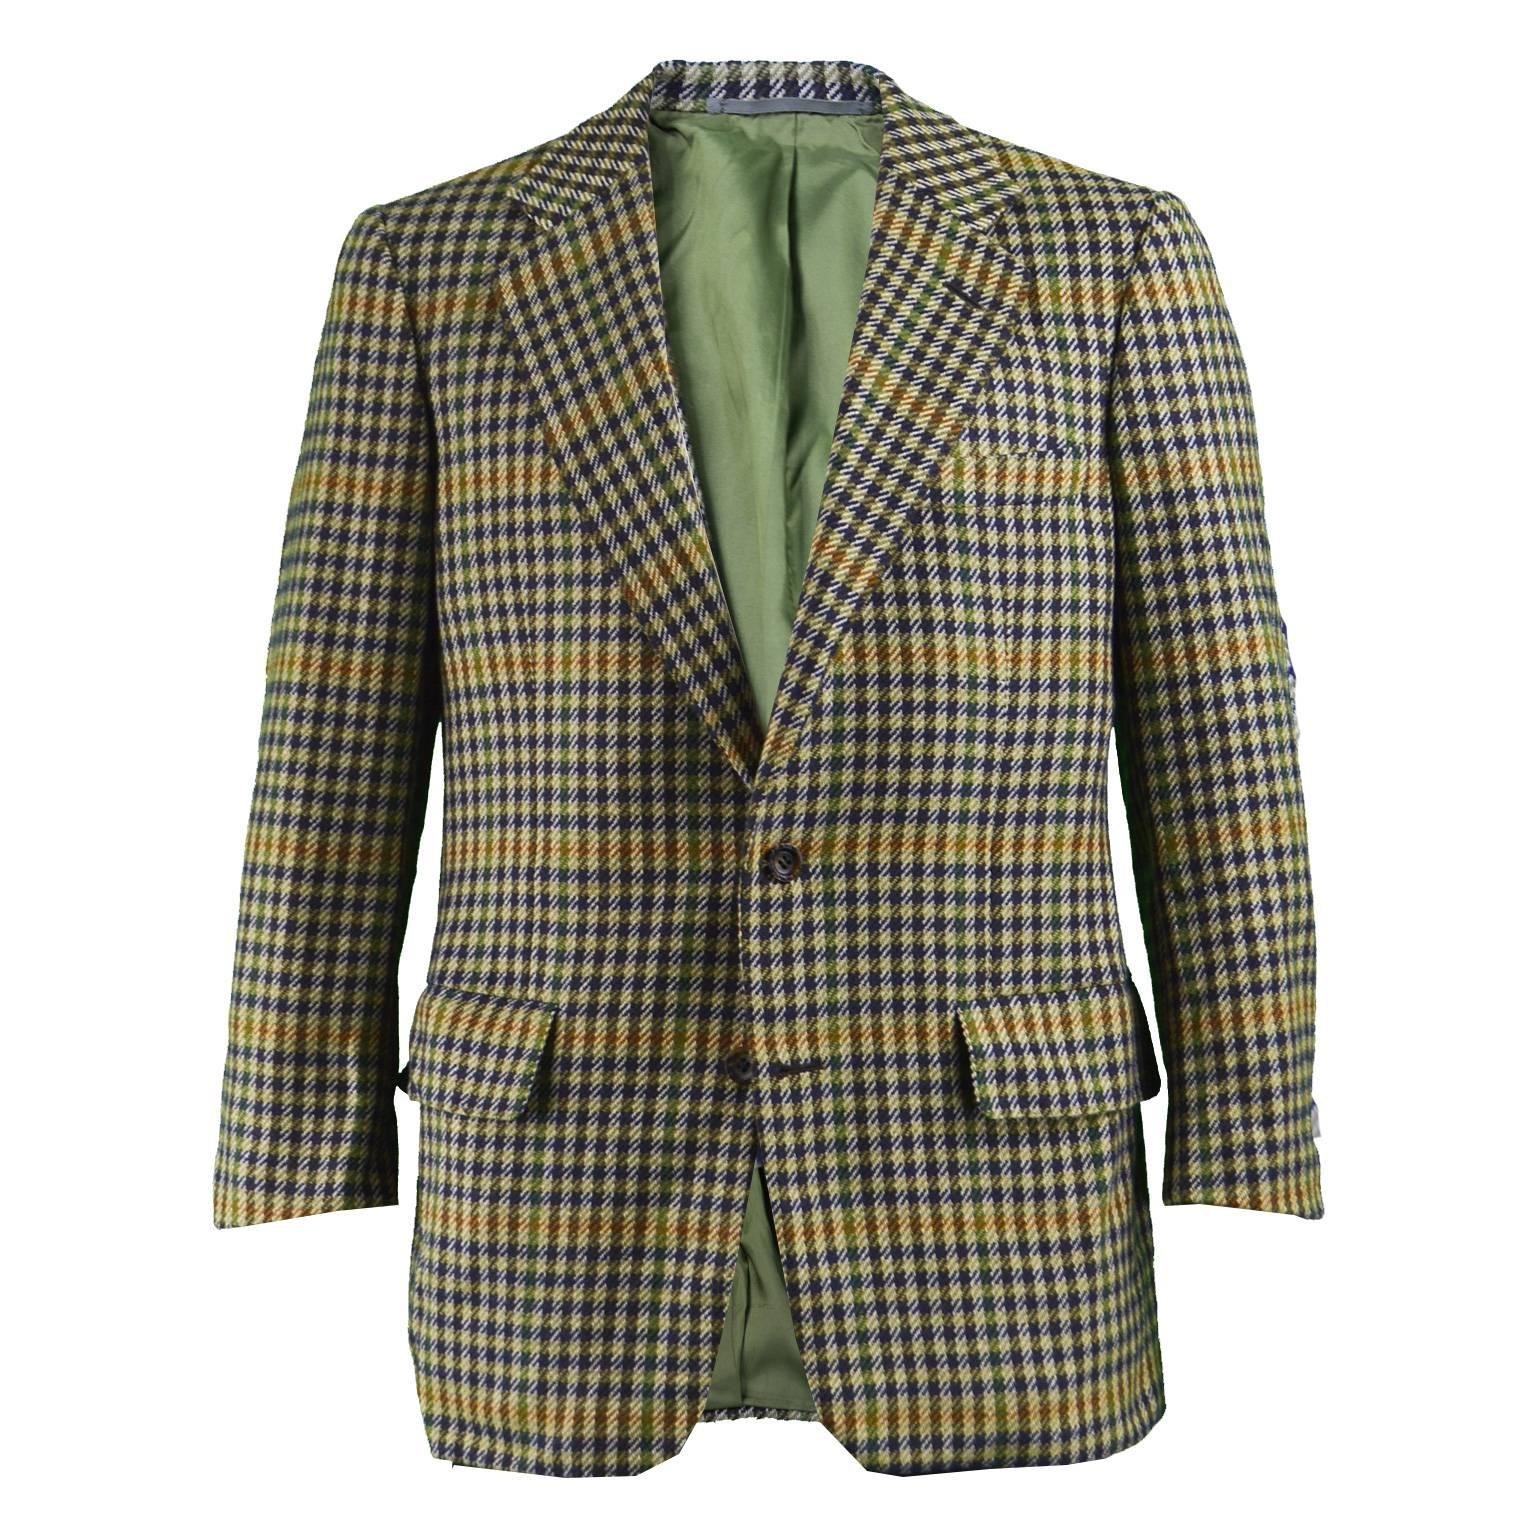 Chester Barrie for Harrods Men's Vintage Pure Cashmere Checked Jacket, 1970s For Sale